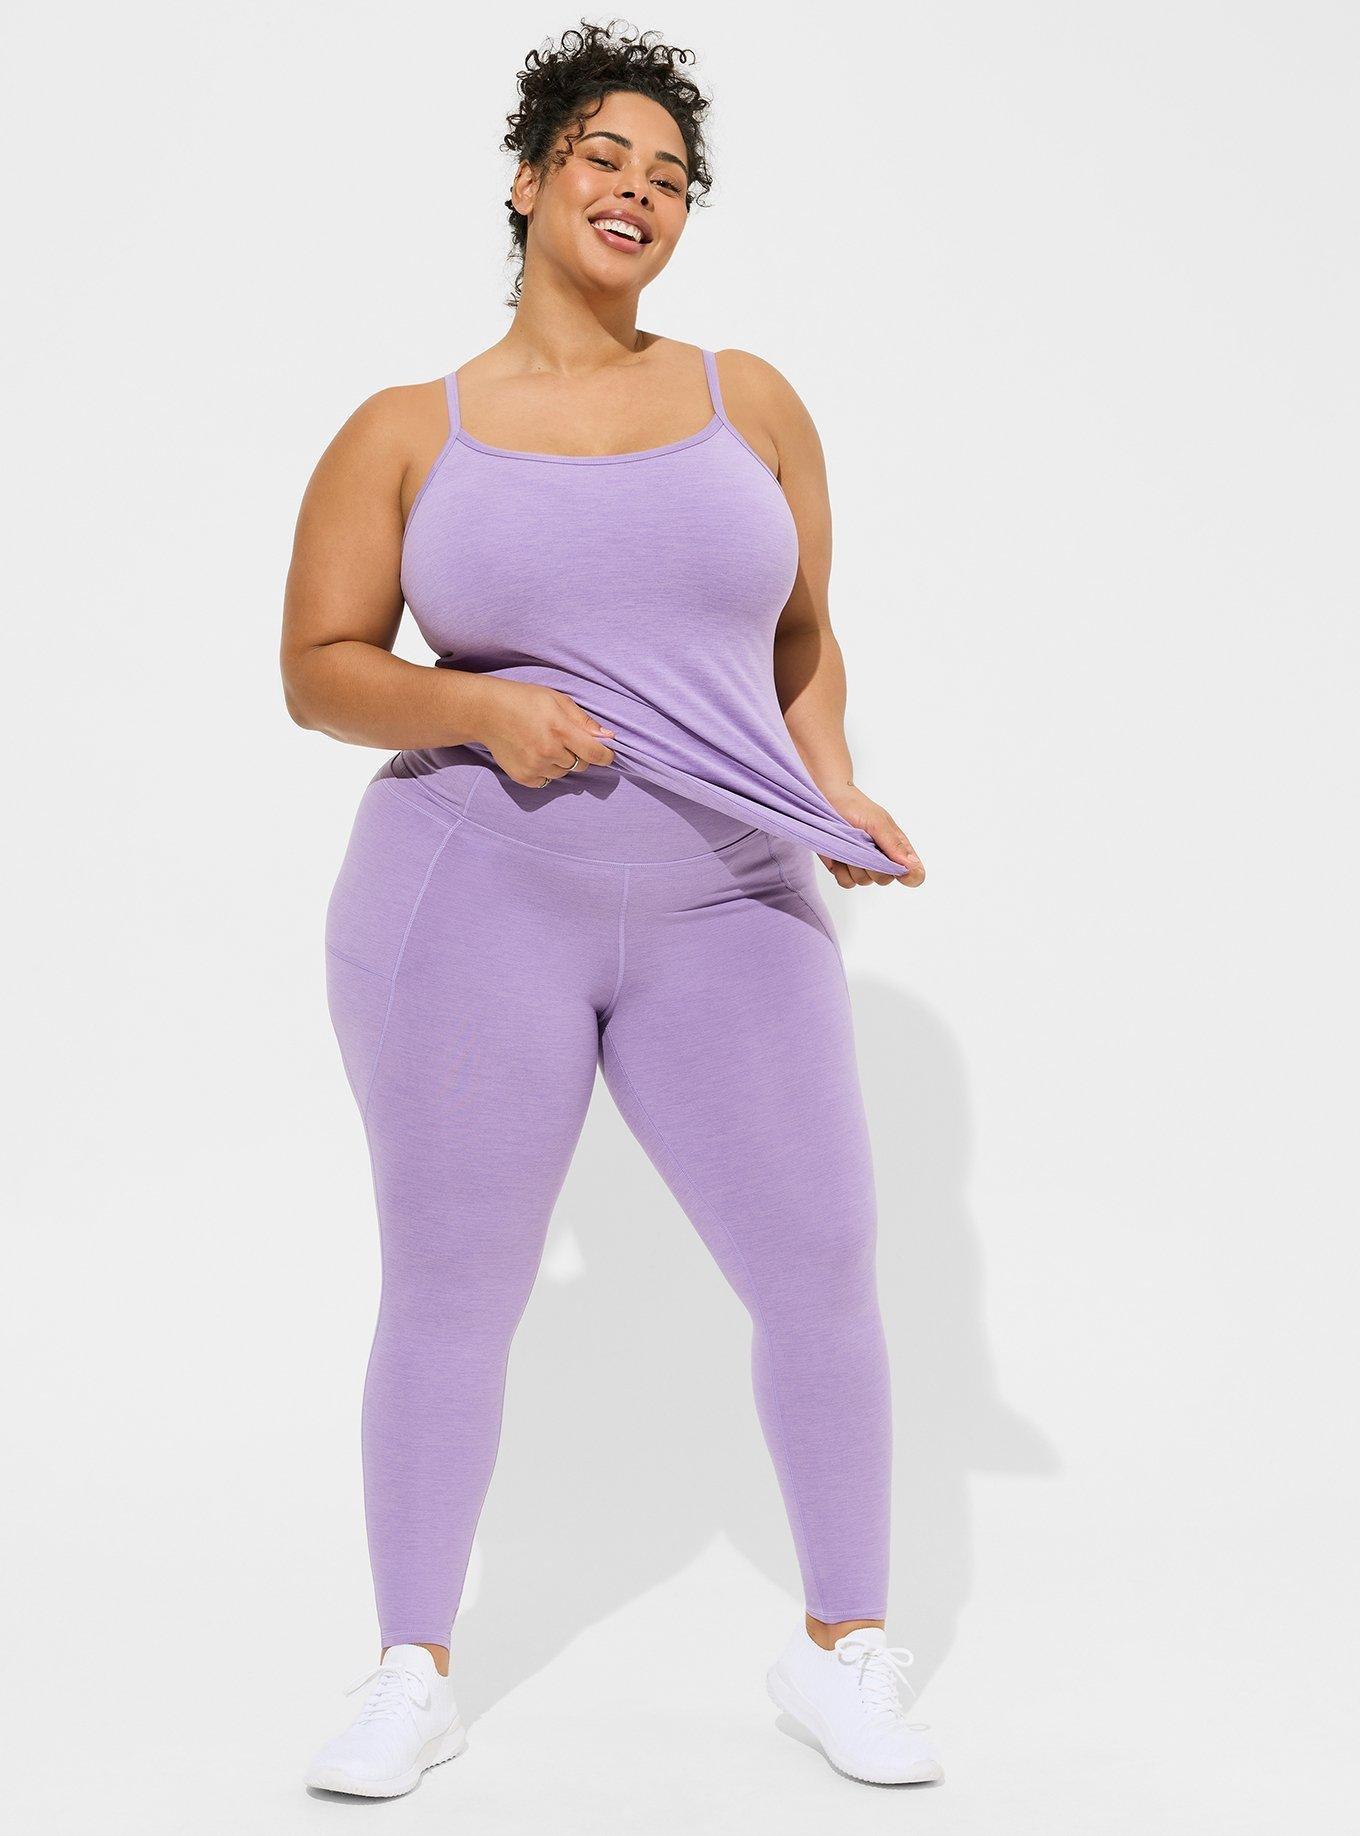 Even Leggings 'Snobs' Say These $14, 'Buttery Soft' Workout Tights Look  More Expensive Than They Are